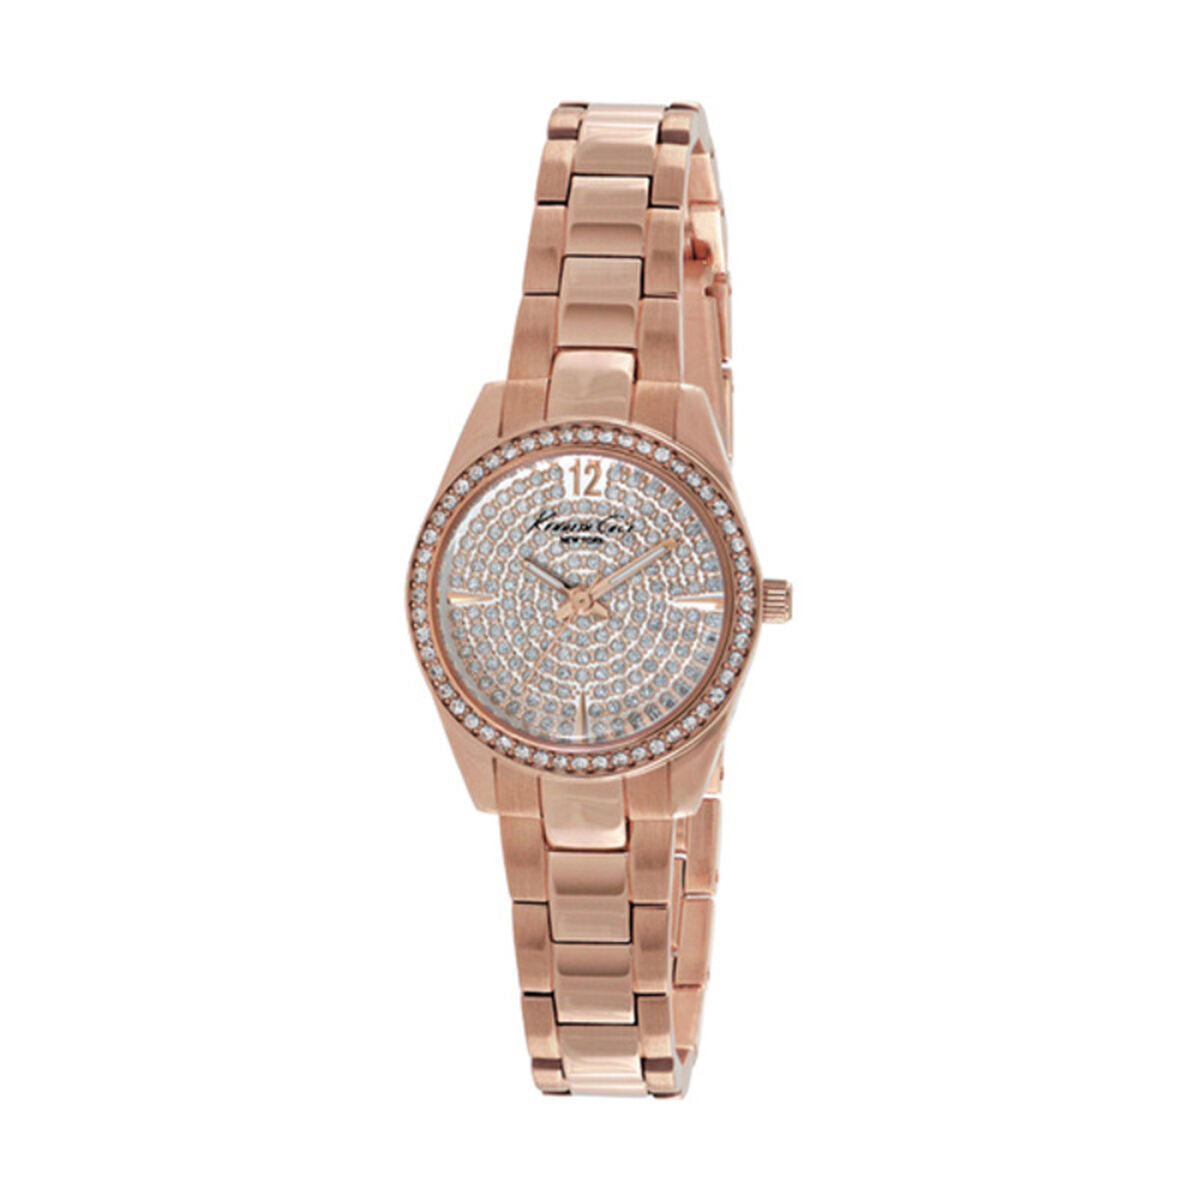 Ladies'Watch Kenneth Cole IKC0005 (Ø 28 mm), Kenneth Cole, Watches, Women, ladieswatch-kenneth-cole-ikc0005-o-28-mm, : Quartz Movement, :Gold, Brand_Kenneth Cole, category-reference-2570, category-reference-2635, category-reference-2995, category-reference-t-19667, category-reference-t-19725, Condition_NEW, fashion, gifts for women, original gifts, Price_50 - 100, RiotNook